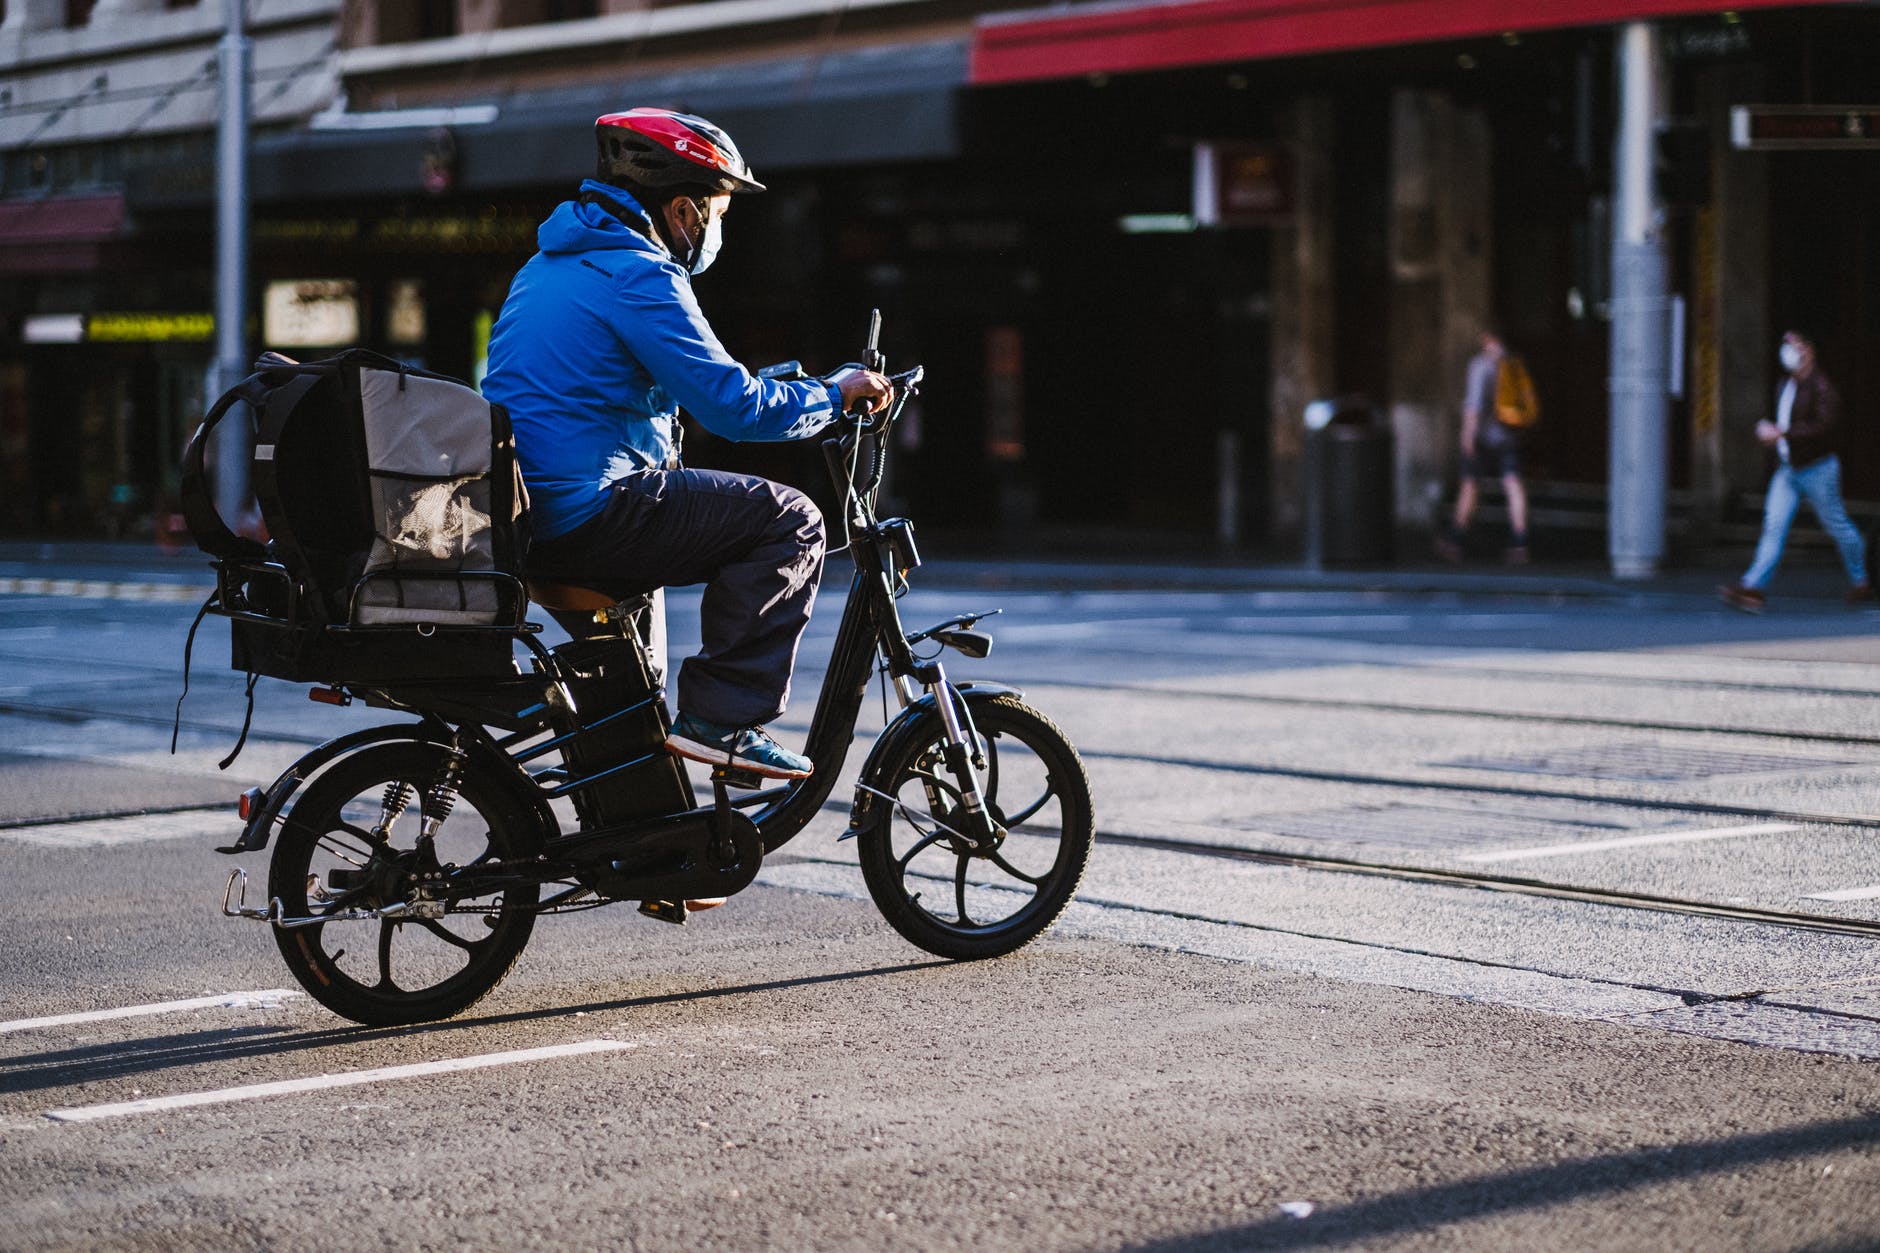 man in blue jacket riding motorcycle on road